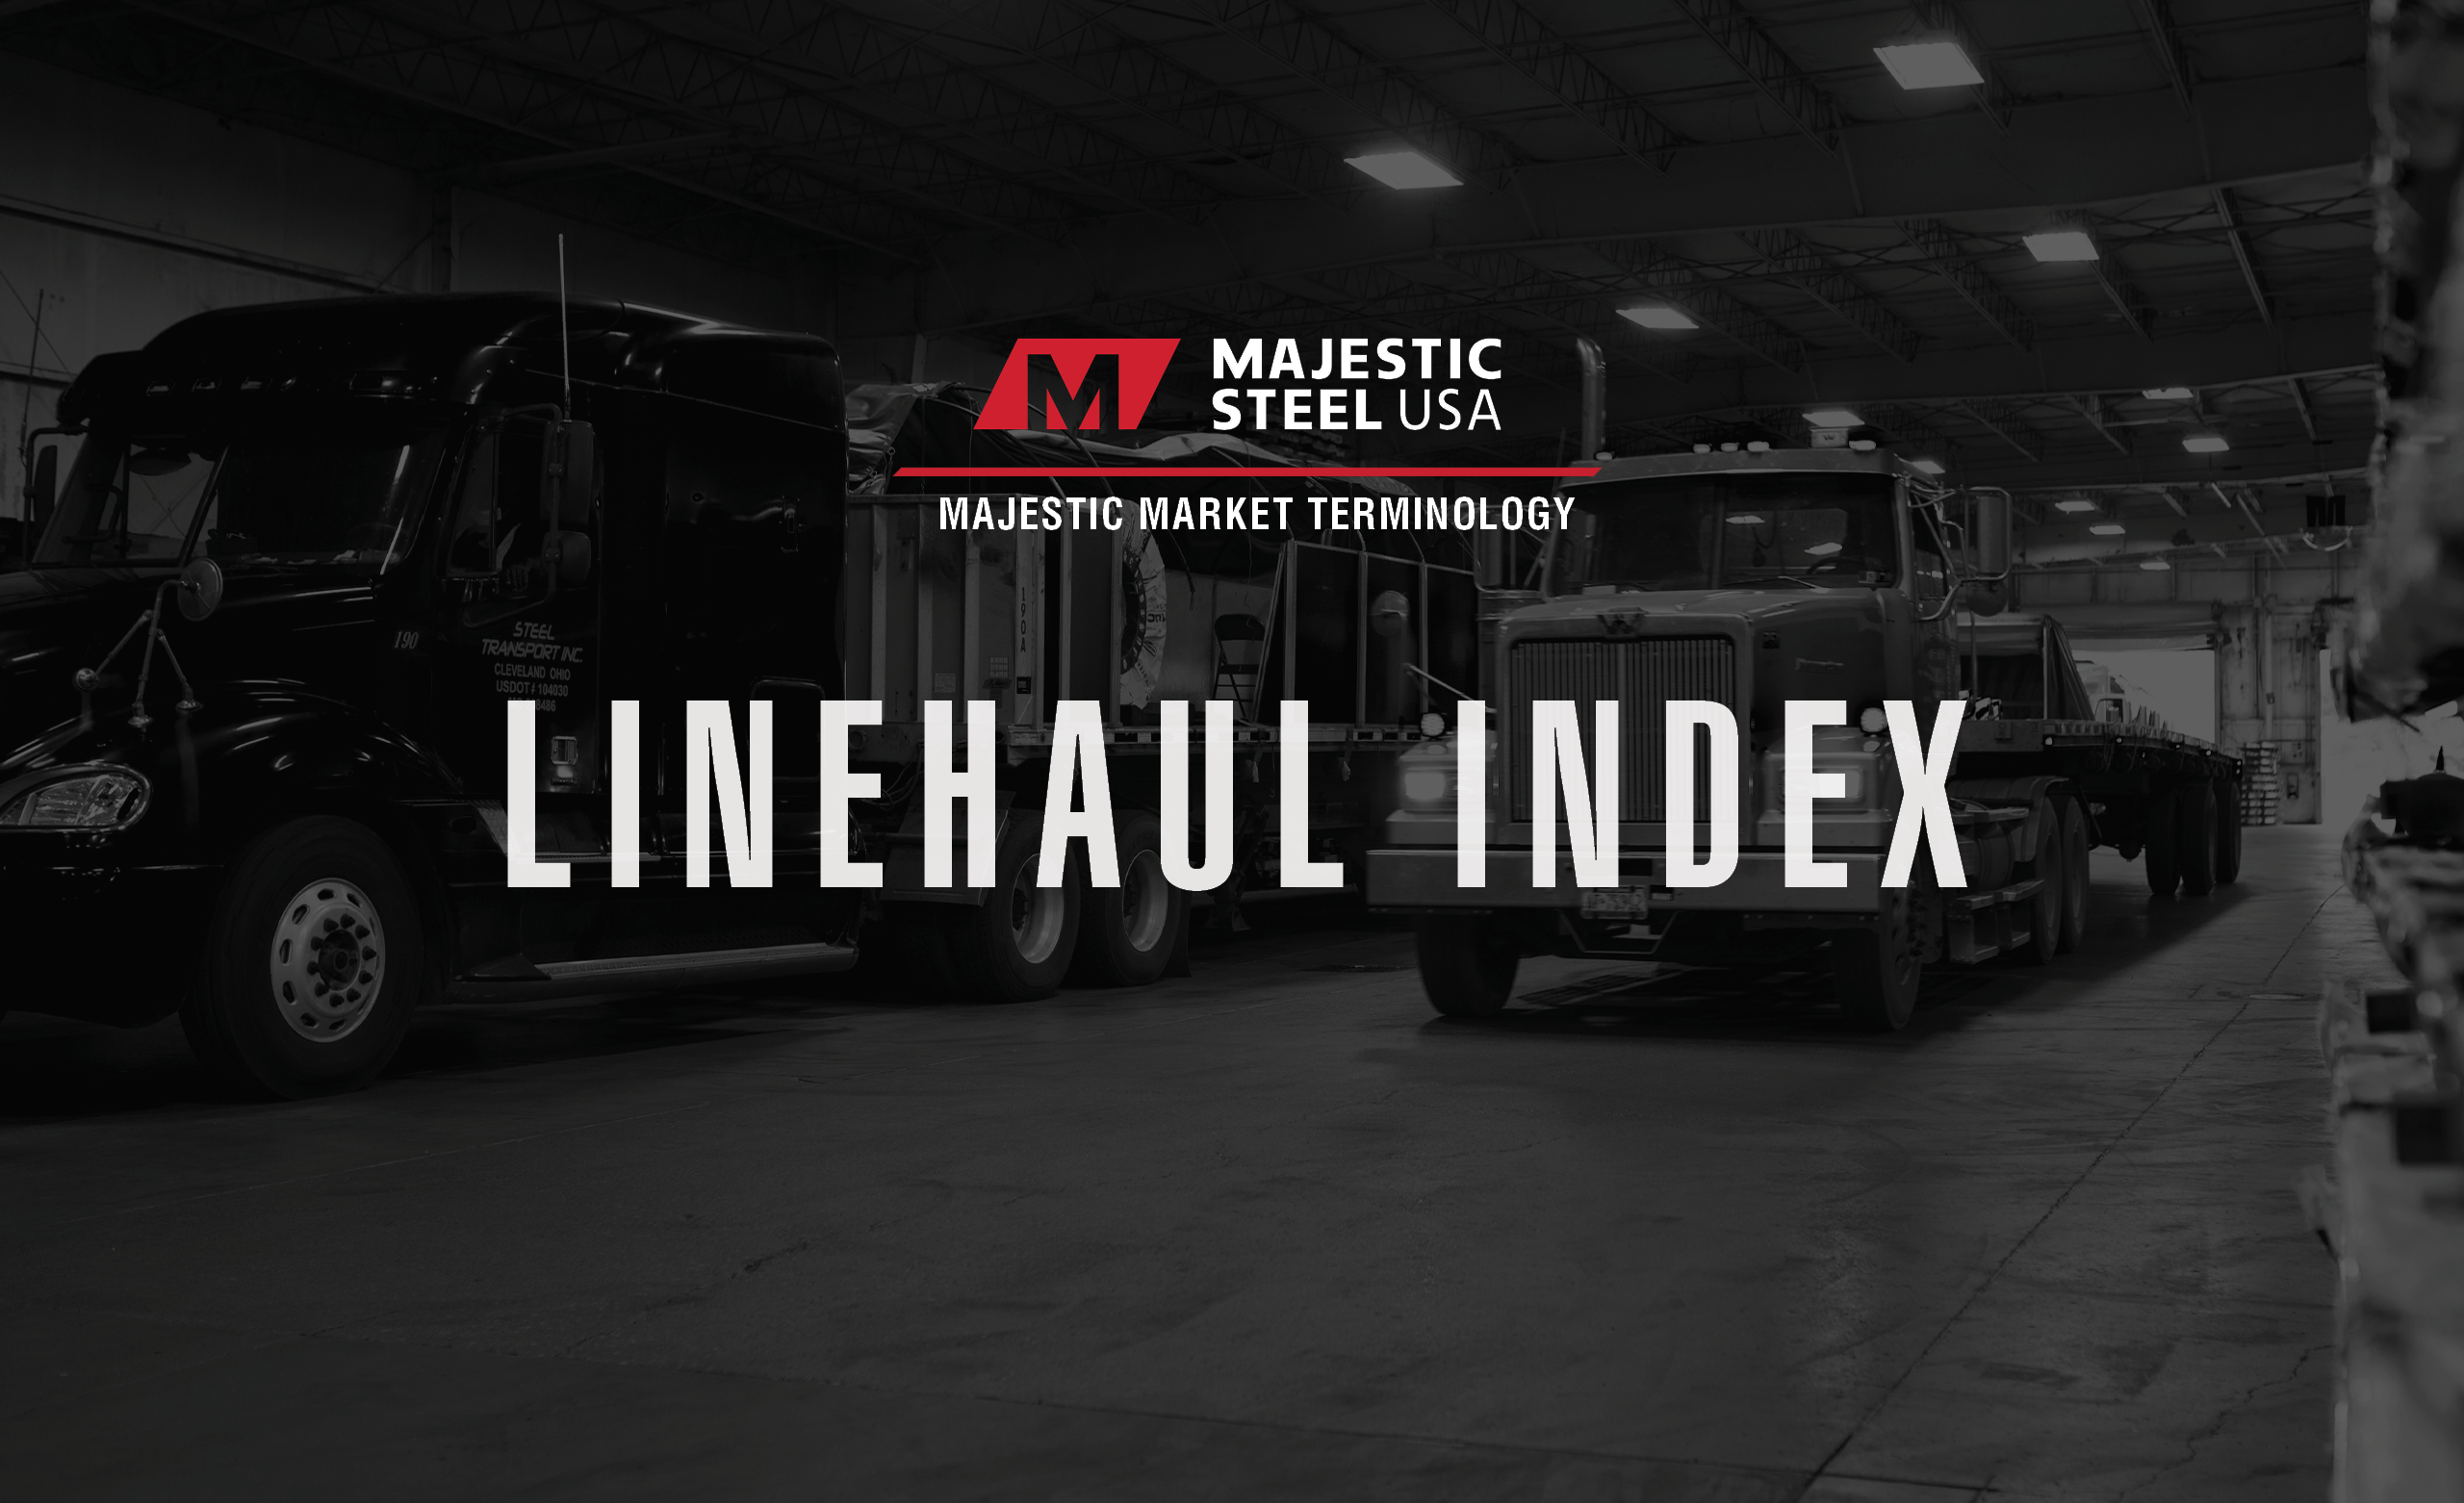 black and white images of trucks in the warehouse to represent linehaul index